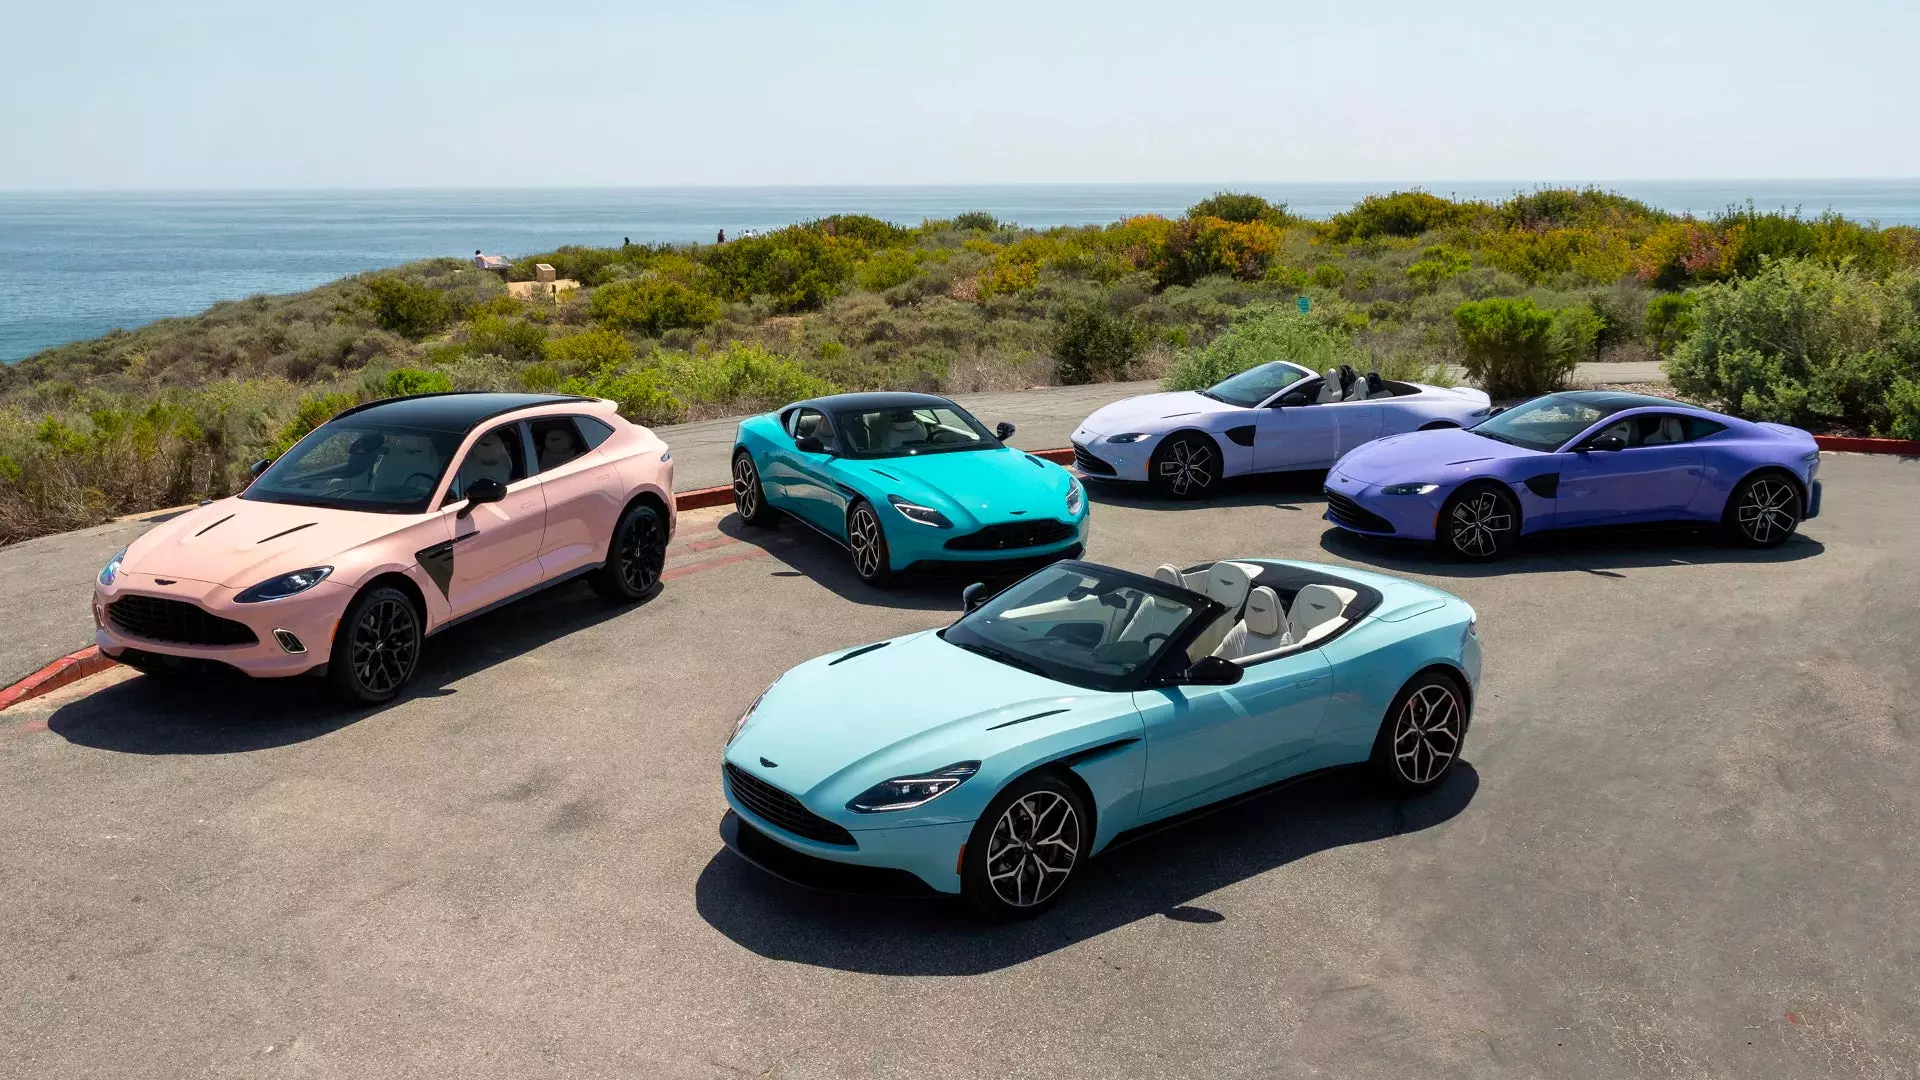 Which of These Easter-Egg Aston Martins Would You Take Home?